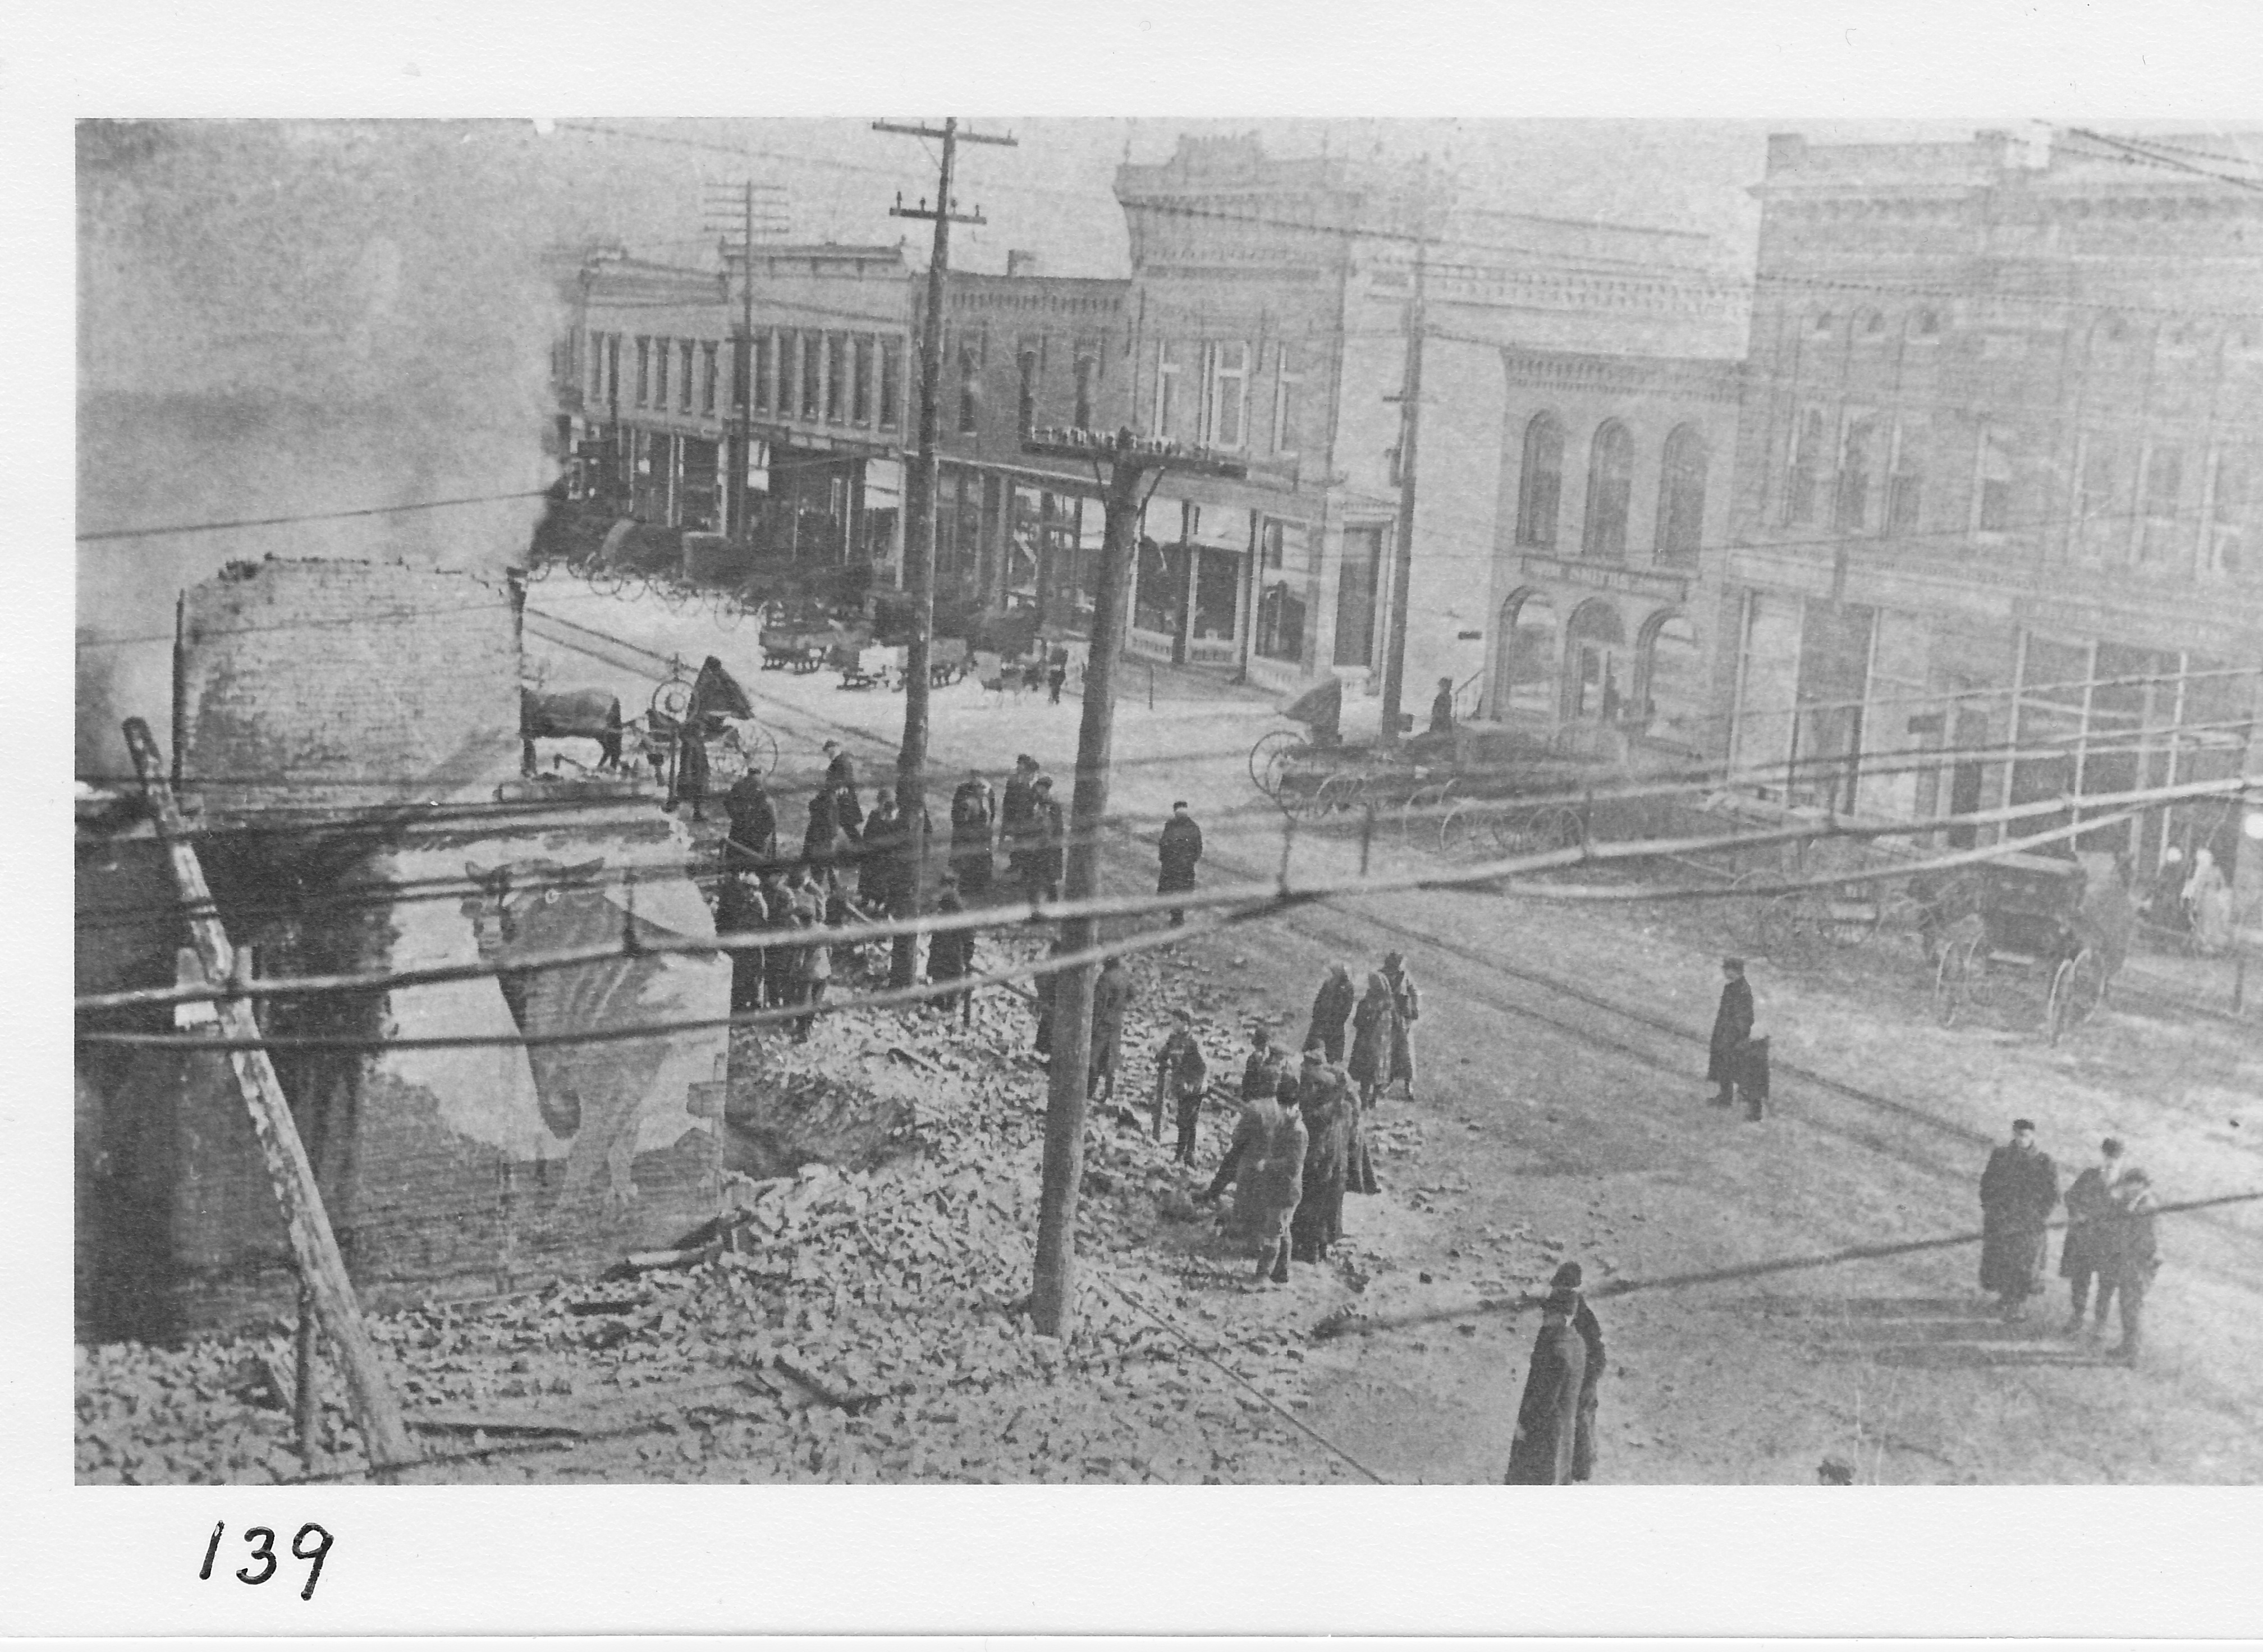 Morning after the fire in January 1912, northeast corner of West Main and North Streets.